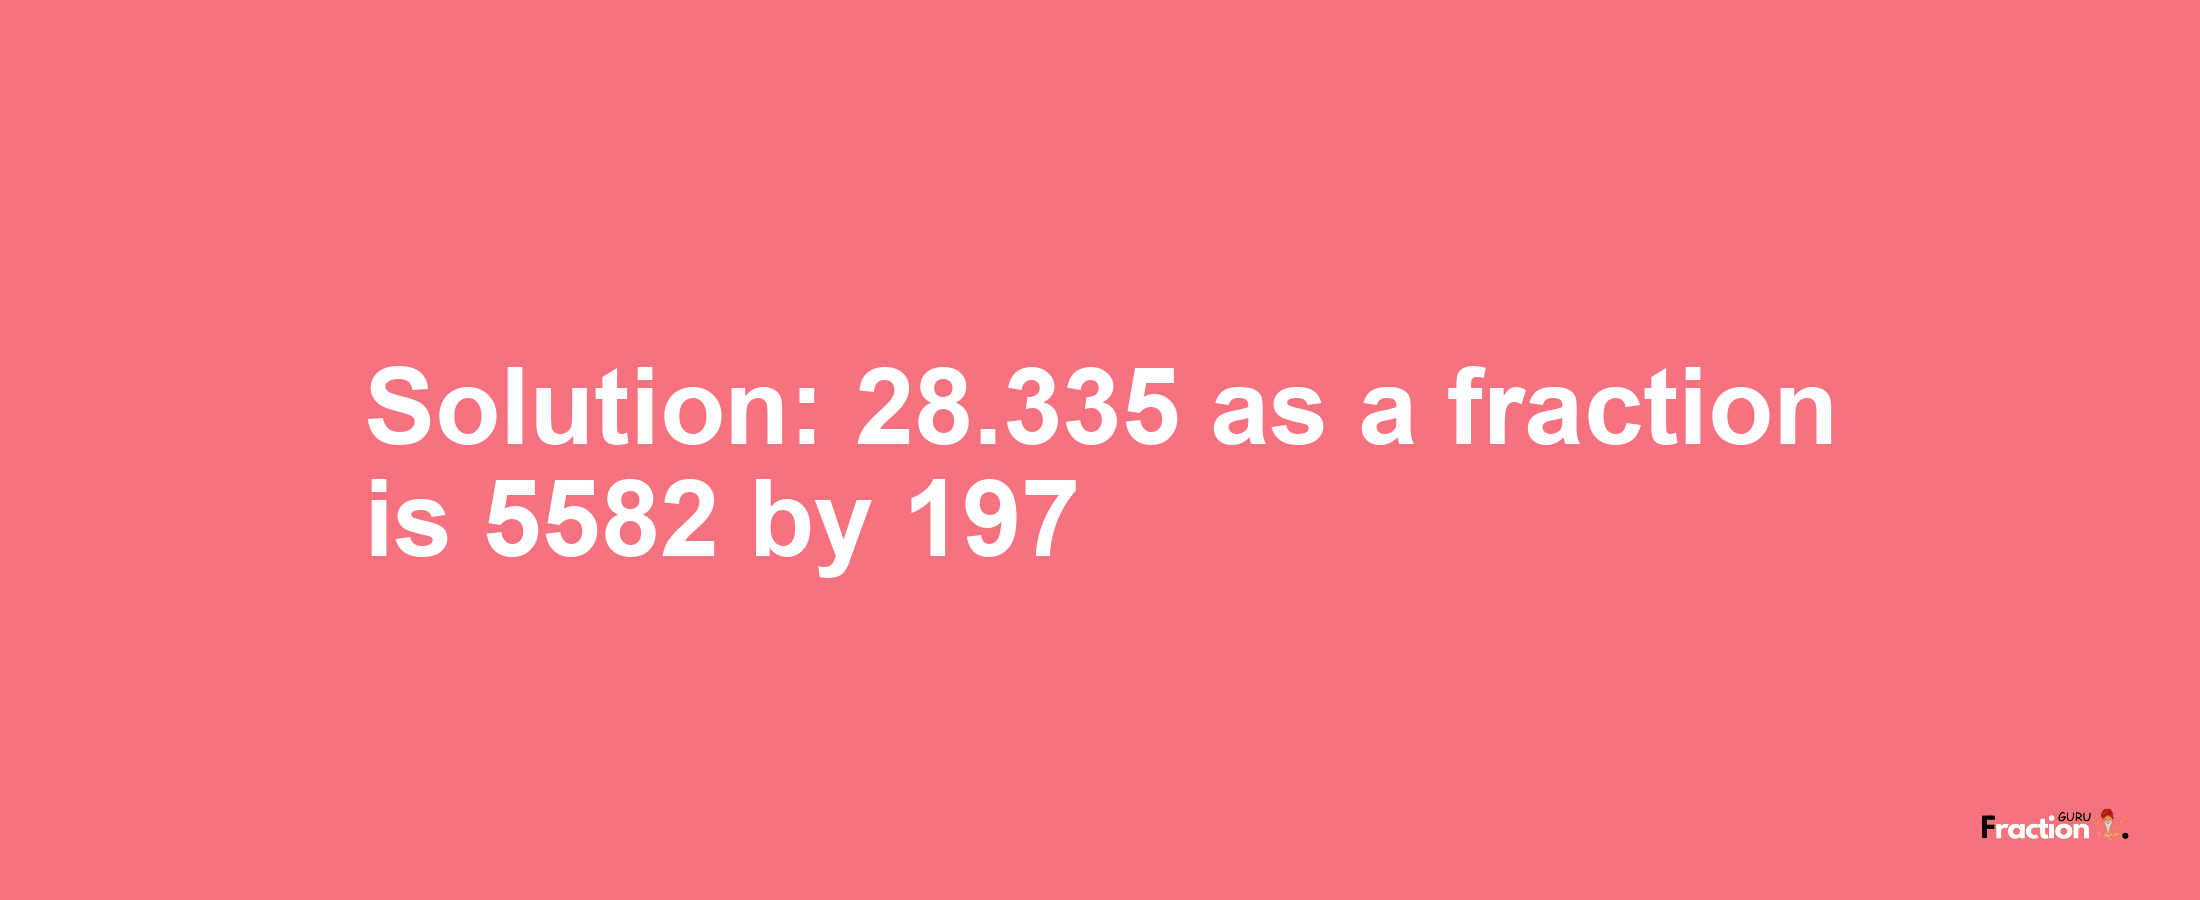 Solution:28.335 as a fraction is 5582/197